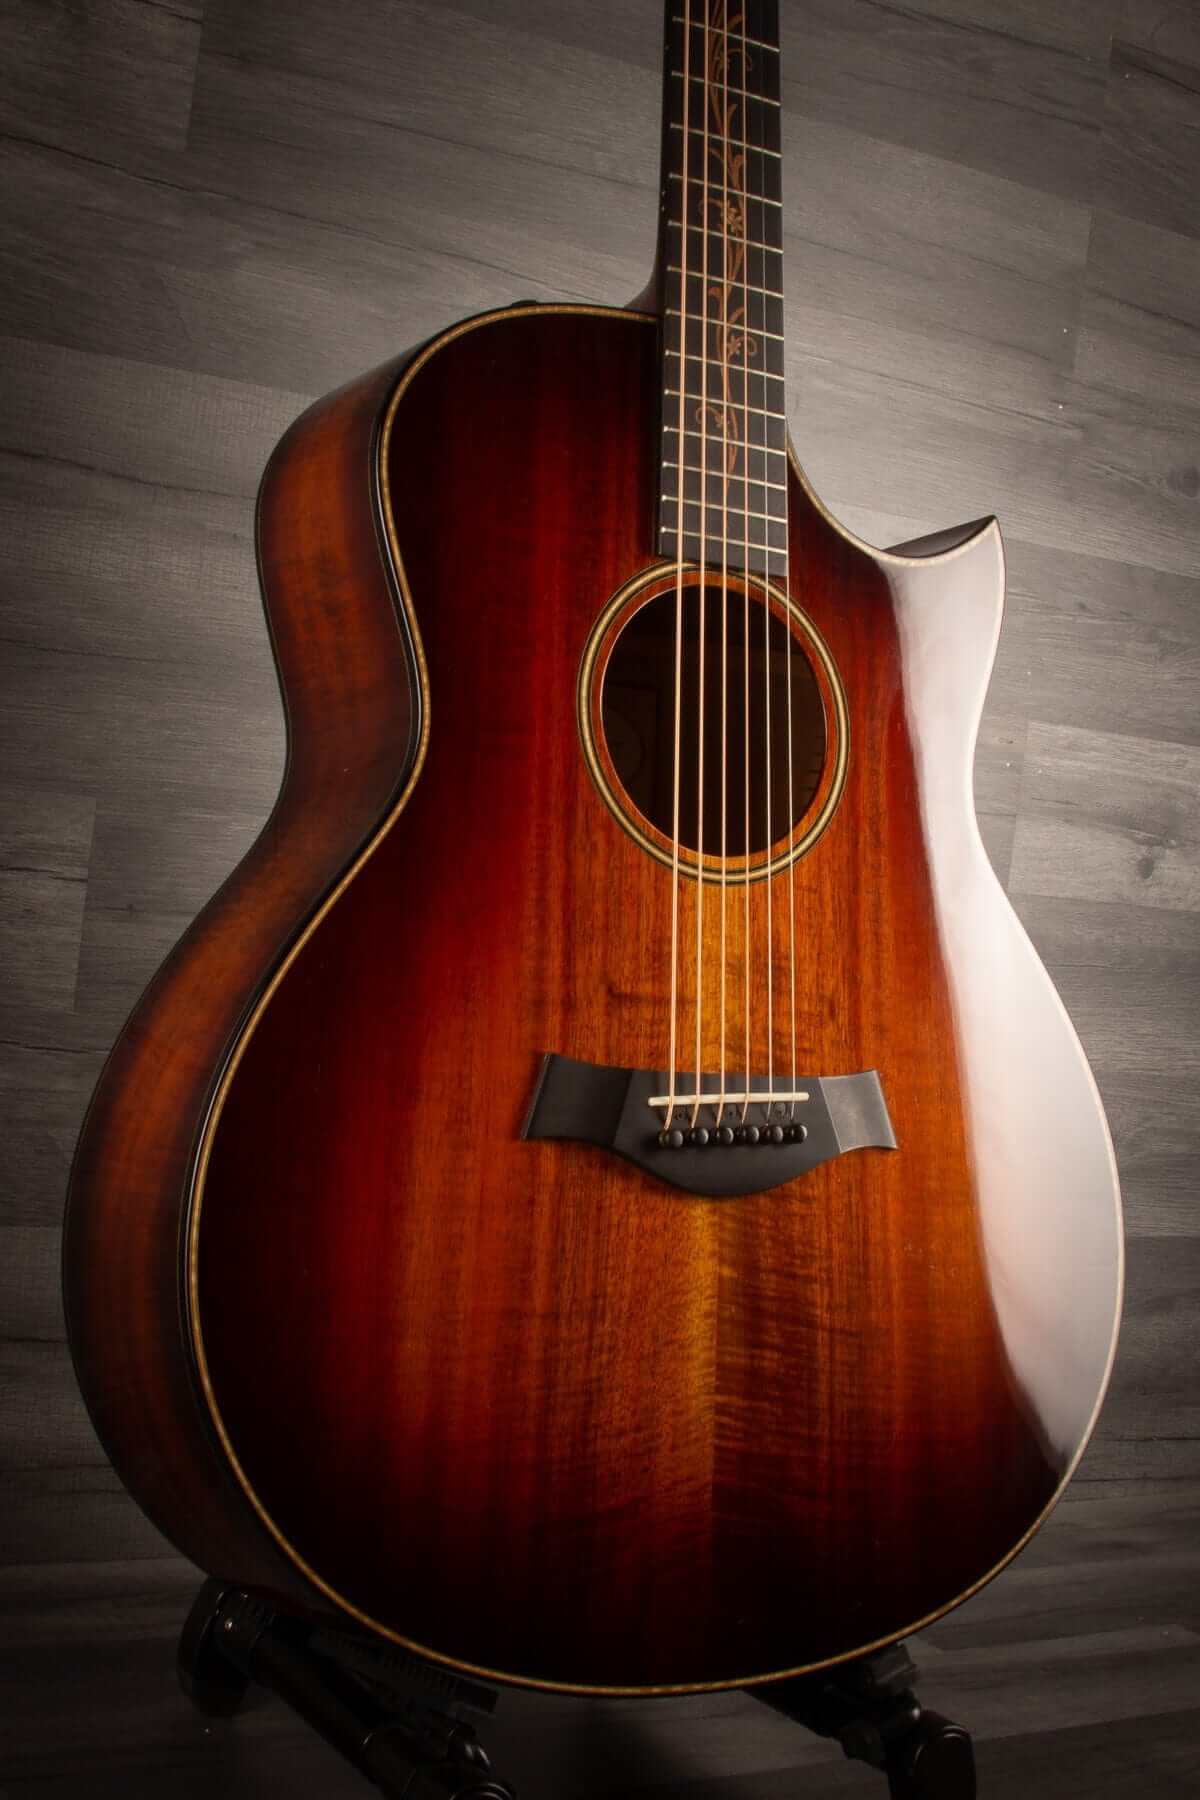 Taylor Acoustic Guitar USED - 2017 Taylor K26e Florentine cutaway